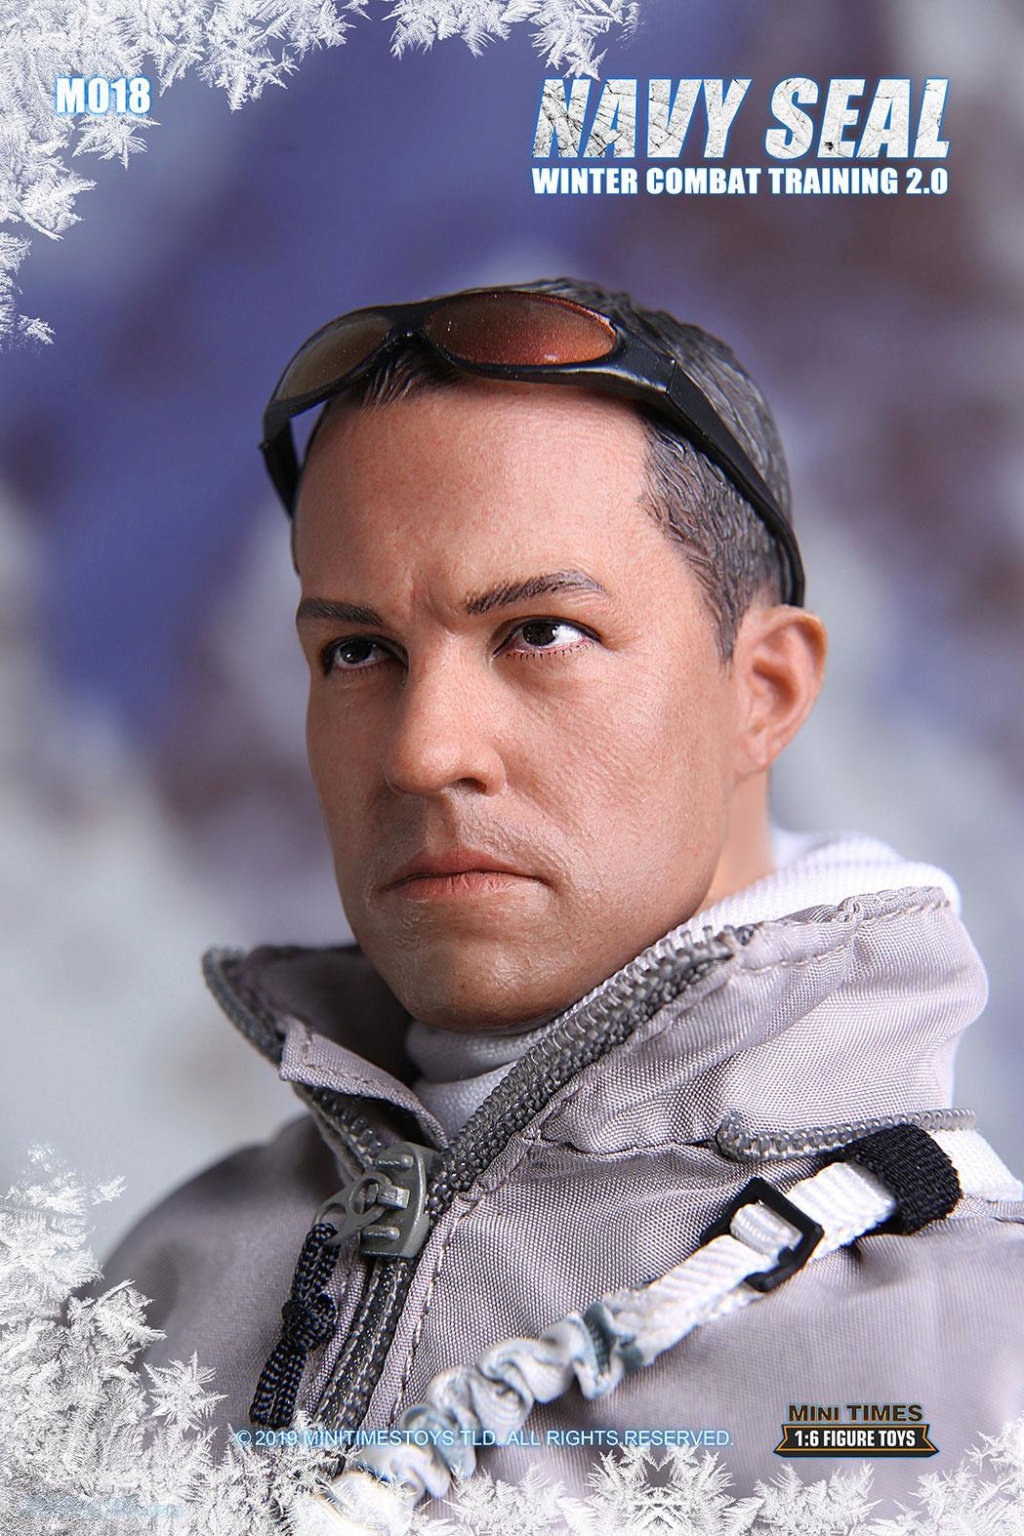 minitimes - NEW PRODUCT: Mini-Times: 1/6 scale Navy Seal Winter Combat Training 2.0 92720130